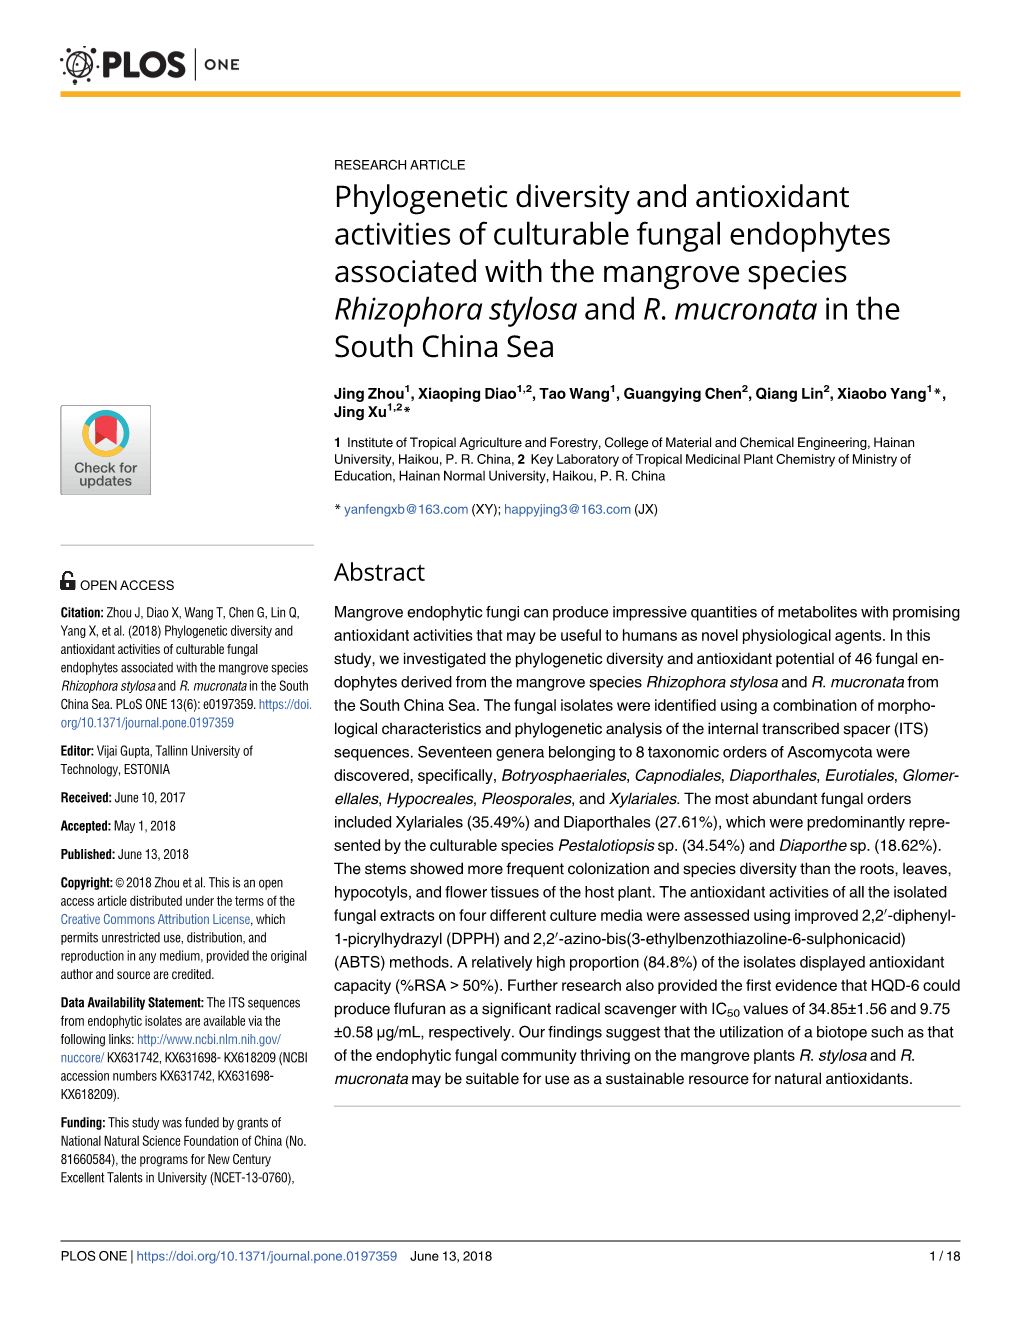 Phylogenetic Diversity and Antioxidant Activities of Culturable Fungal Endophytes Associated with the Mangrove Species Rhizophora Stylosa and R